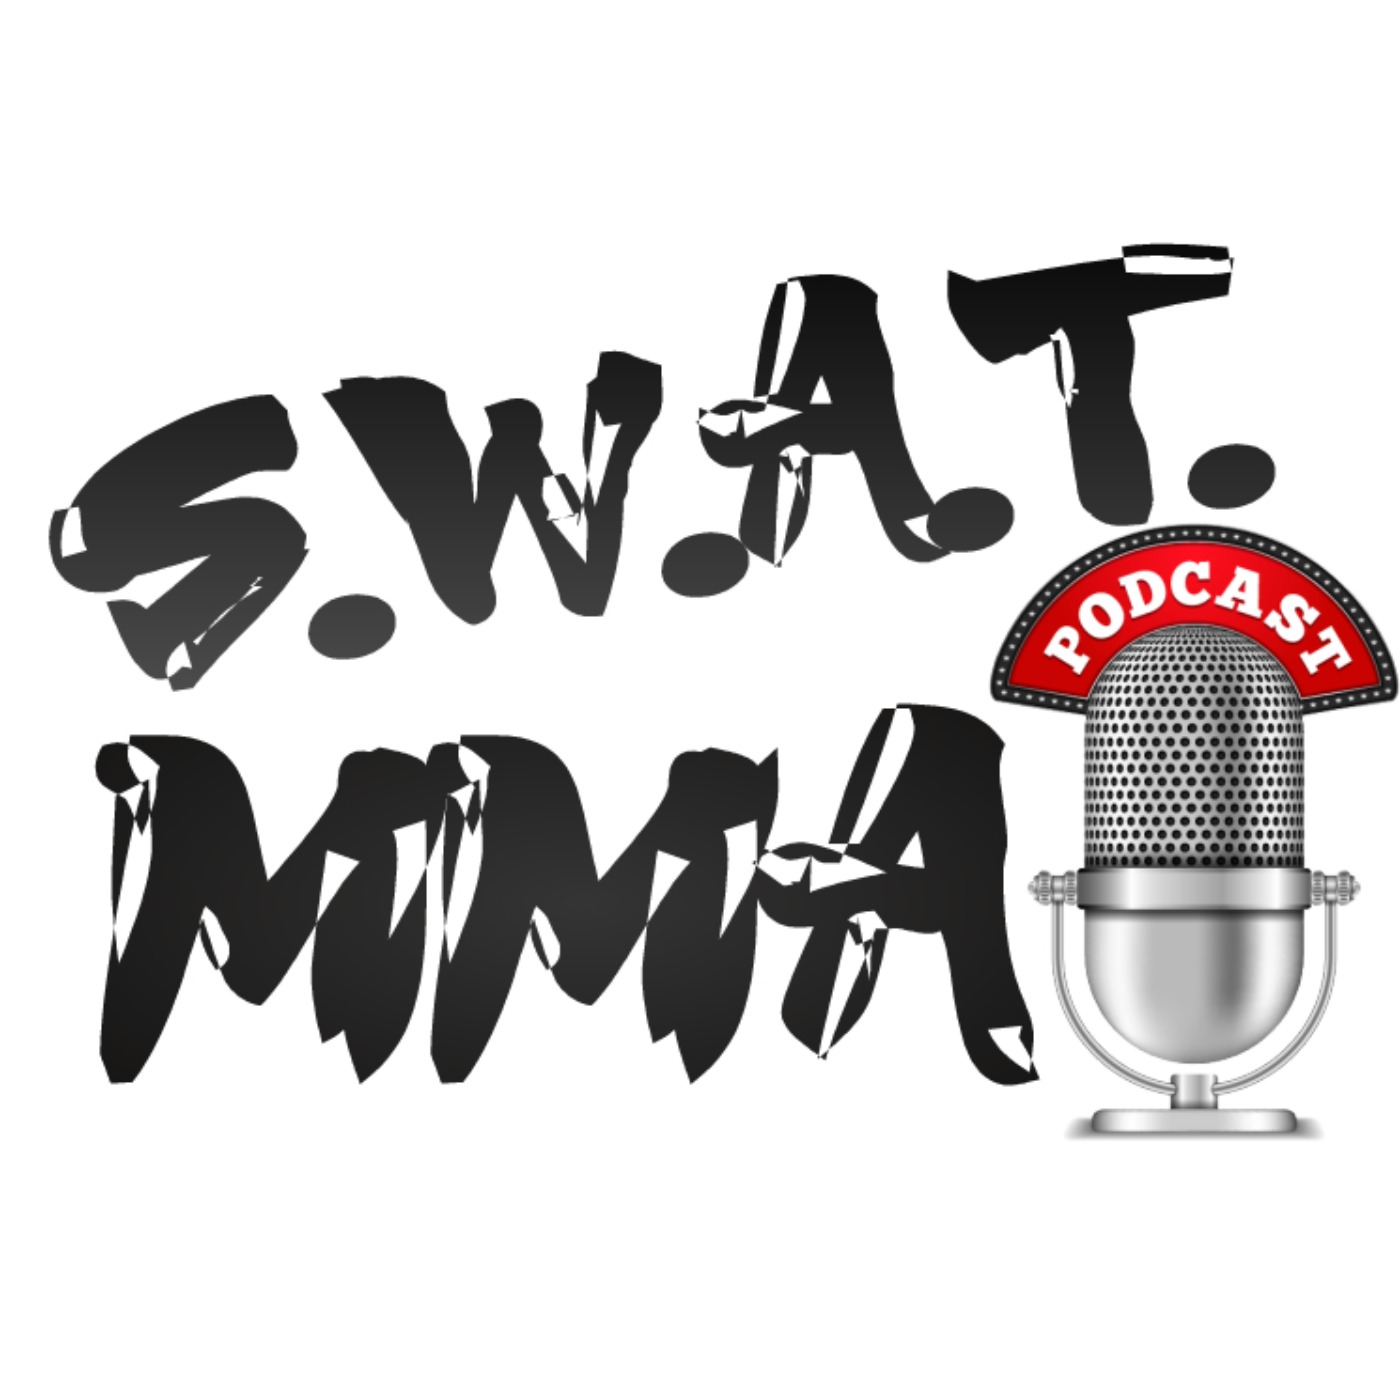 The S.W.A.T. MMA Podcast